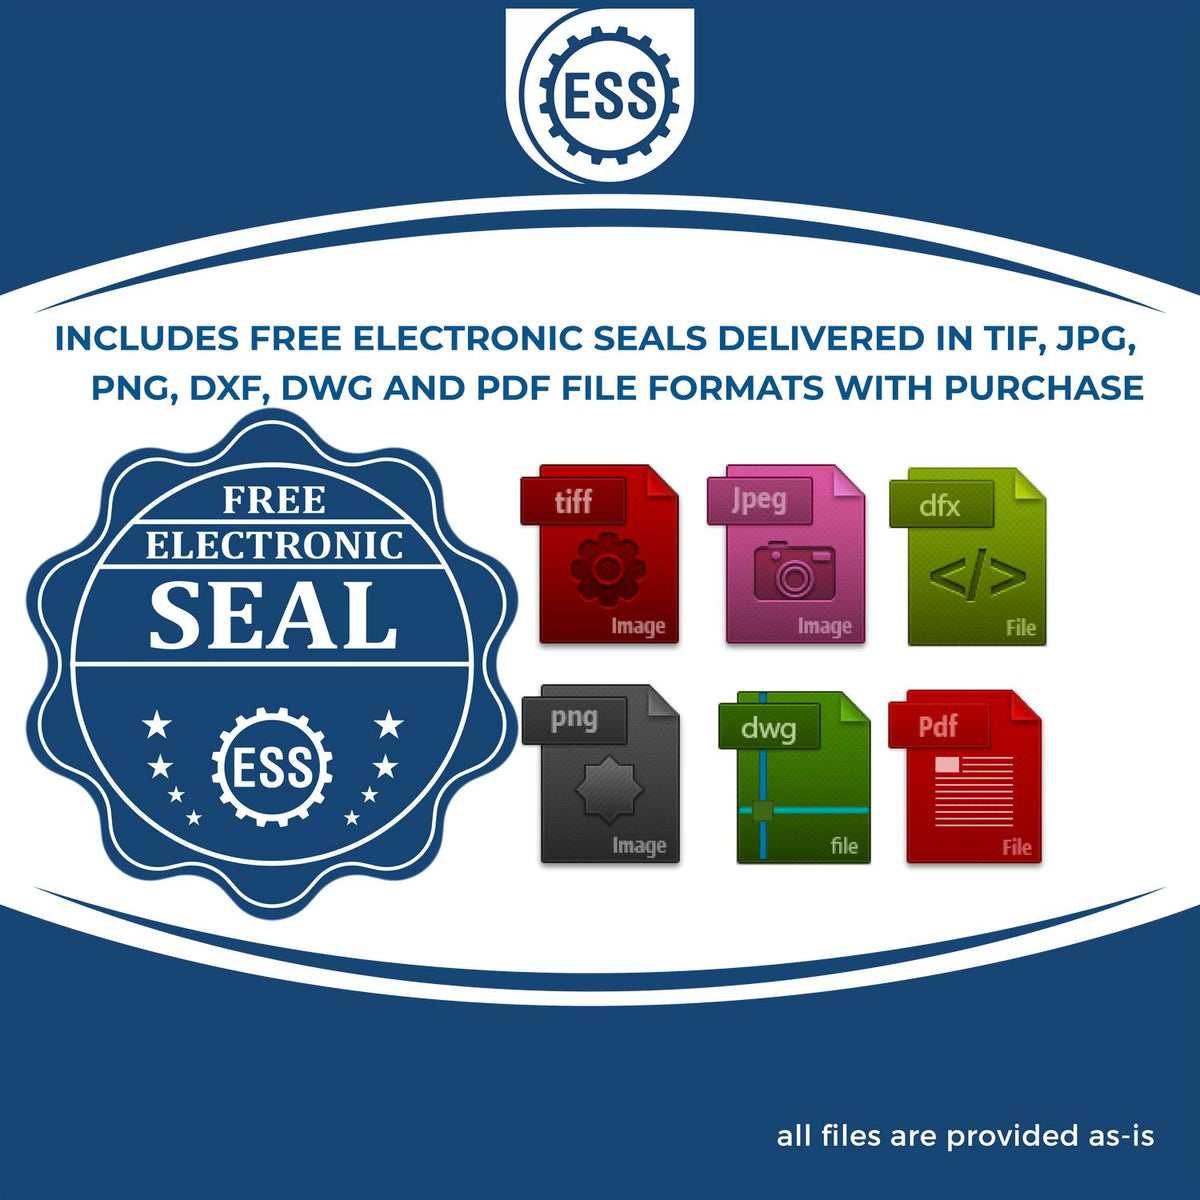 An infographic for the free electronic seal for the Handheld Maryland Land Surveyor Seal illustrating the different file type icons such as DXF, DWG, TIF, JPG and PNG.